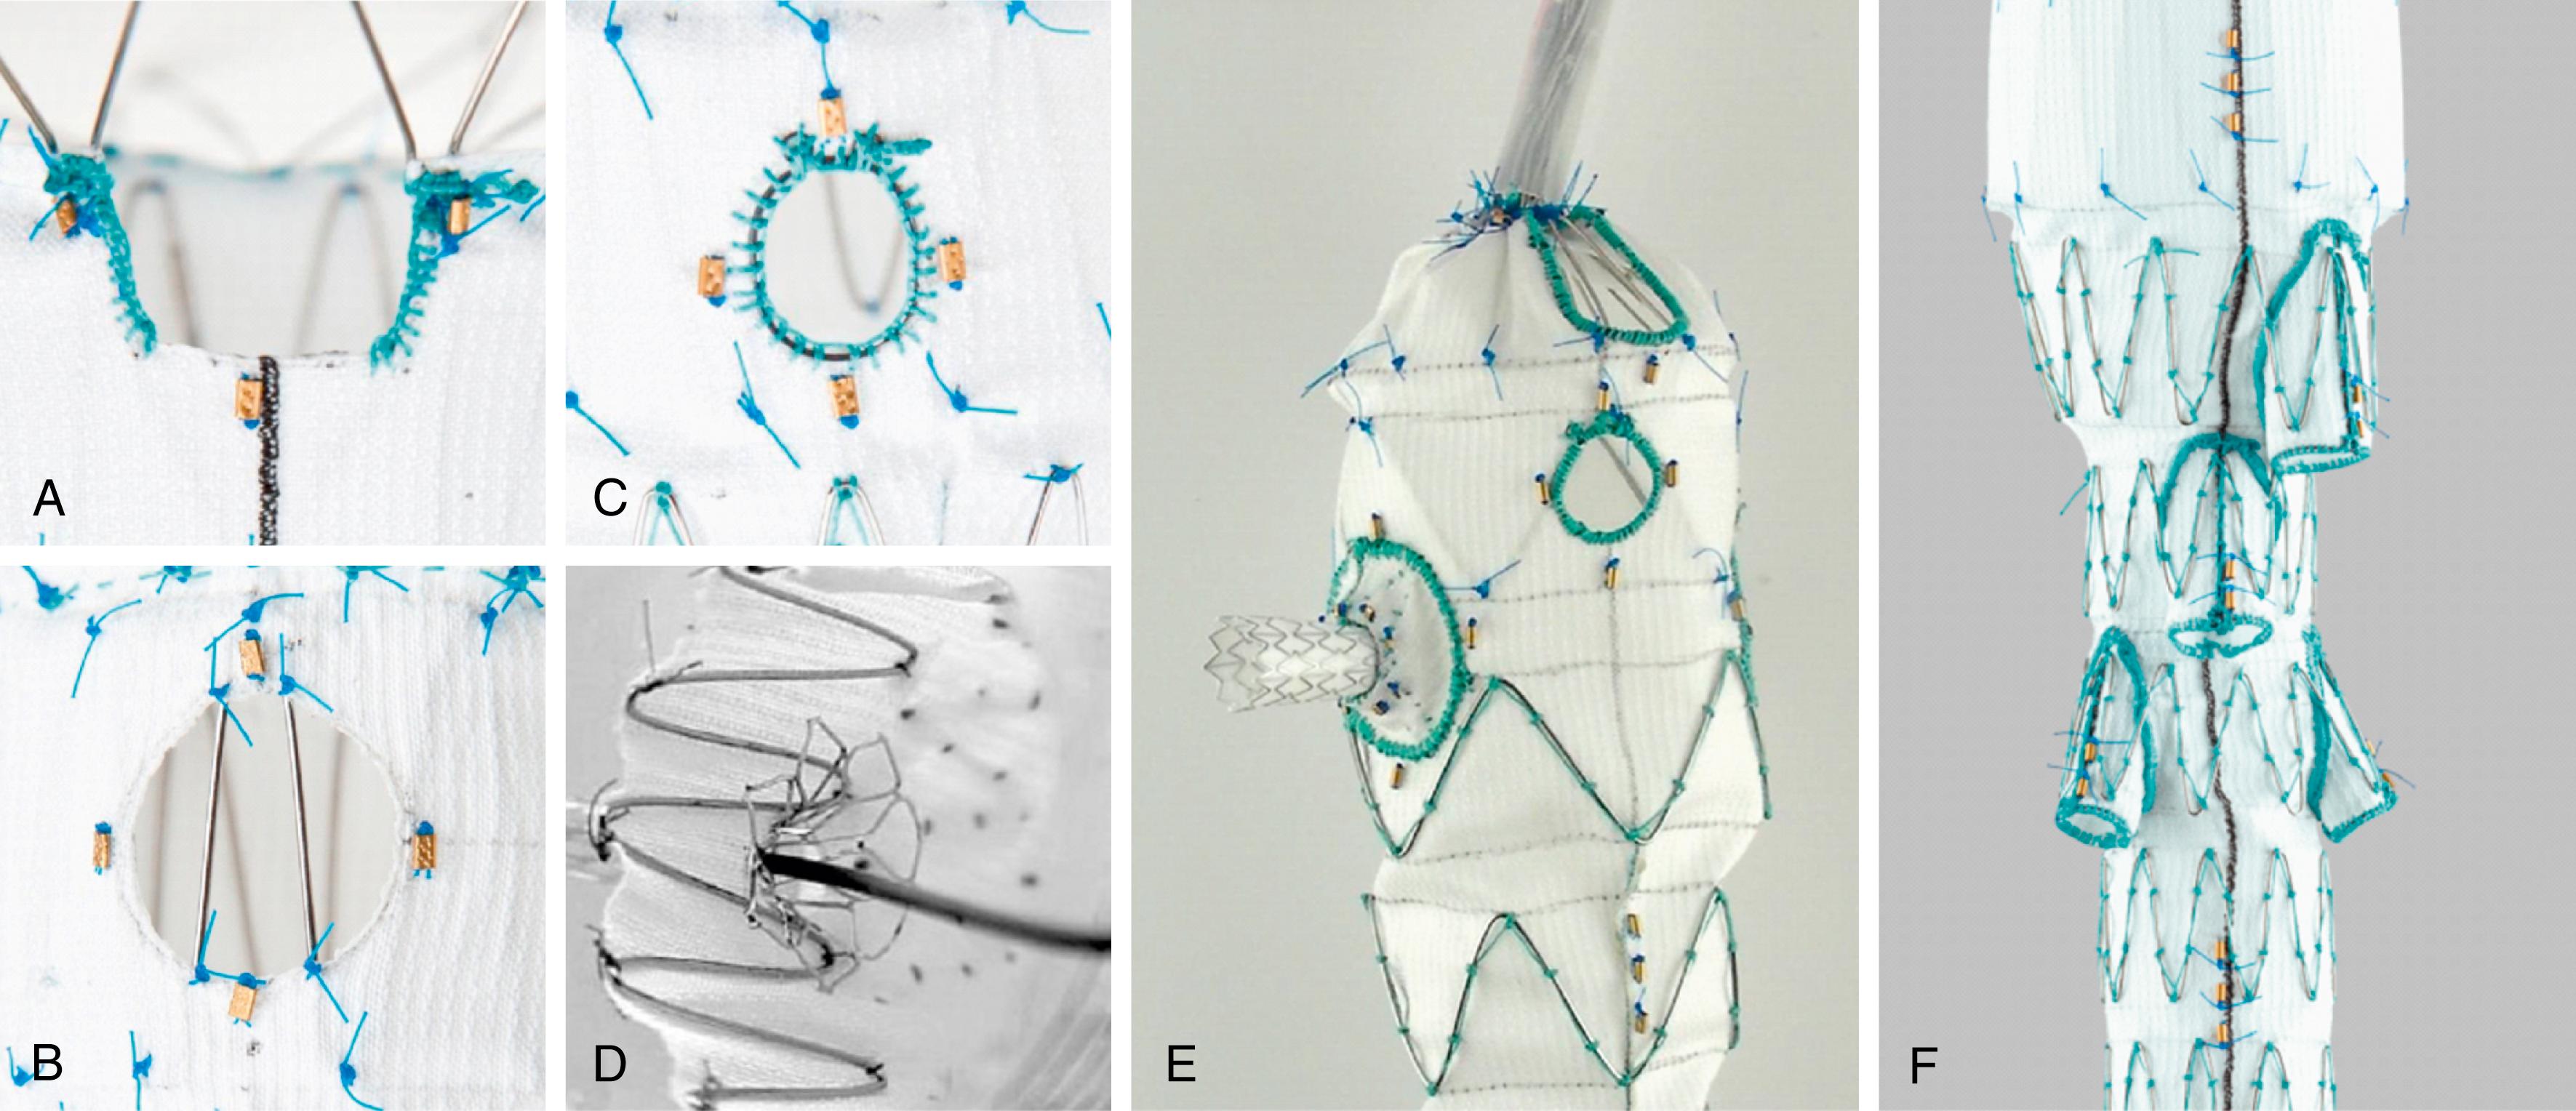 Figure 82.1, Illustrations of ( A ) scallop, ( B ) fenestration, ( C ) reinforced fenestration, ( D ) fenestration supported with a flared, bare-metal stent, ( E ) pivot fenestration supported with a covered balloon-expandable covered stent, and ( F ) side arm branch, as defined by the SVS Reporting Standards for Endovascular Repair of Aneurysms Involving the Renal–Mesenteric Arteries.